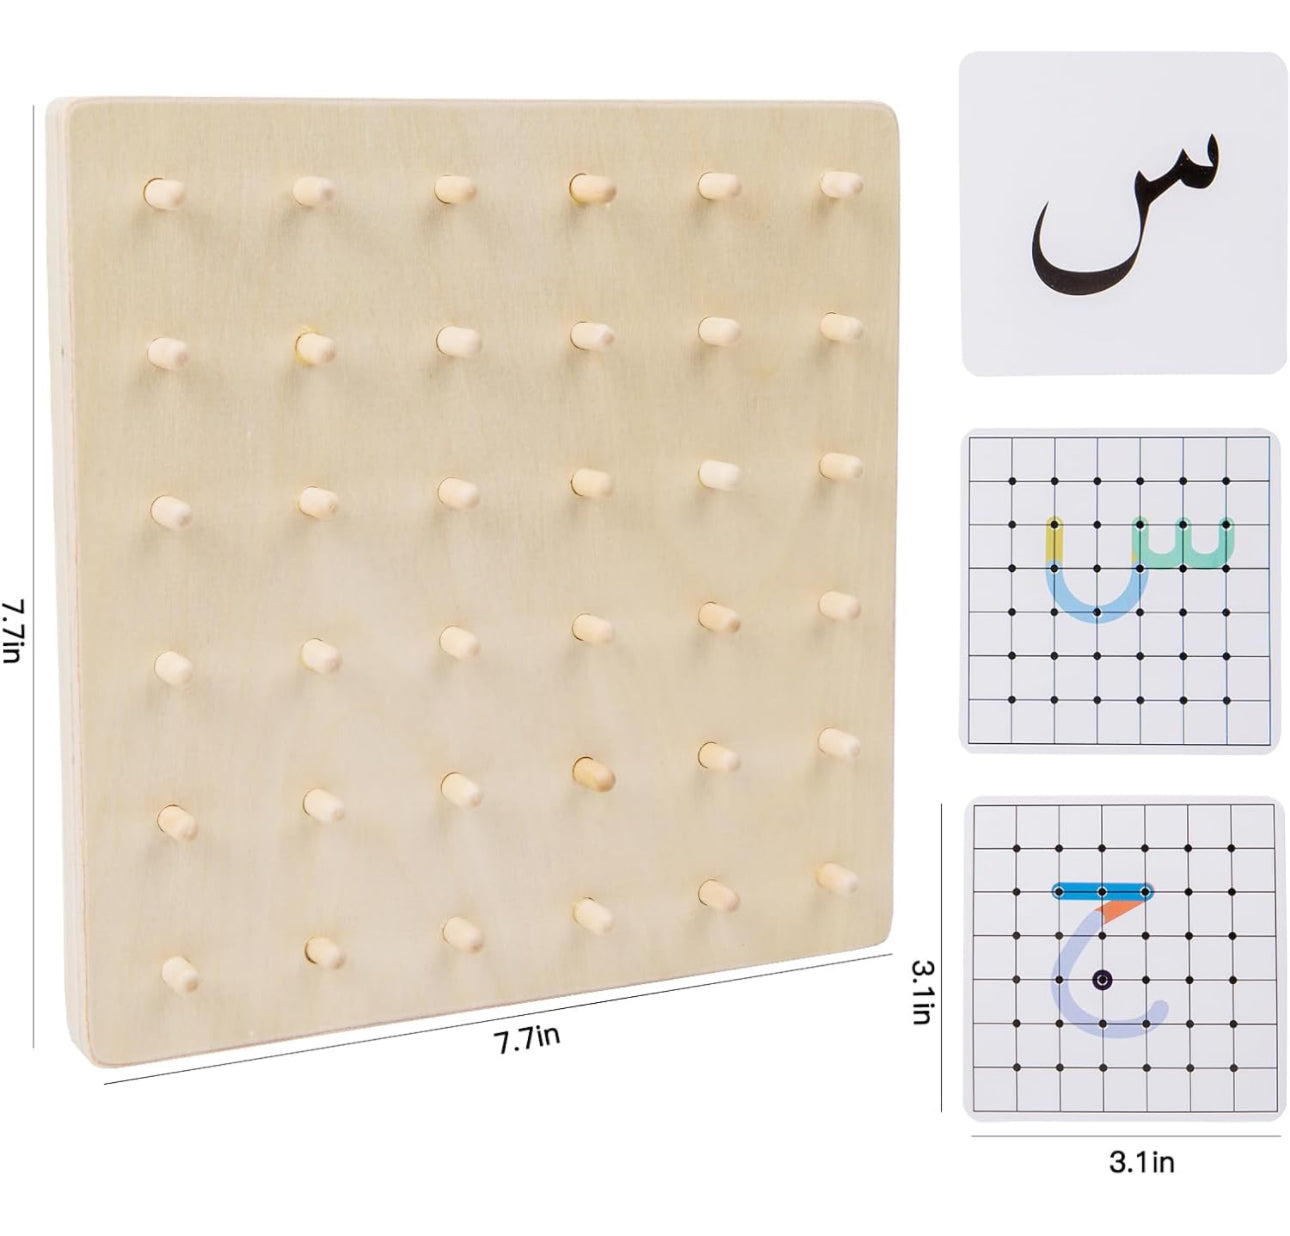 Montessori Arabic Letter Educational Toy with Wooden Geoboard and Flash Cards,Alphabet Skill Exercise.